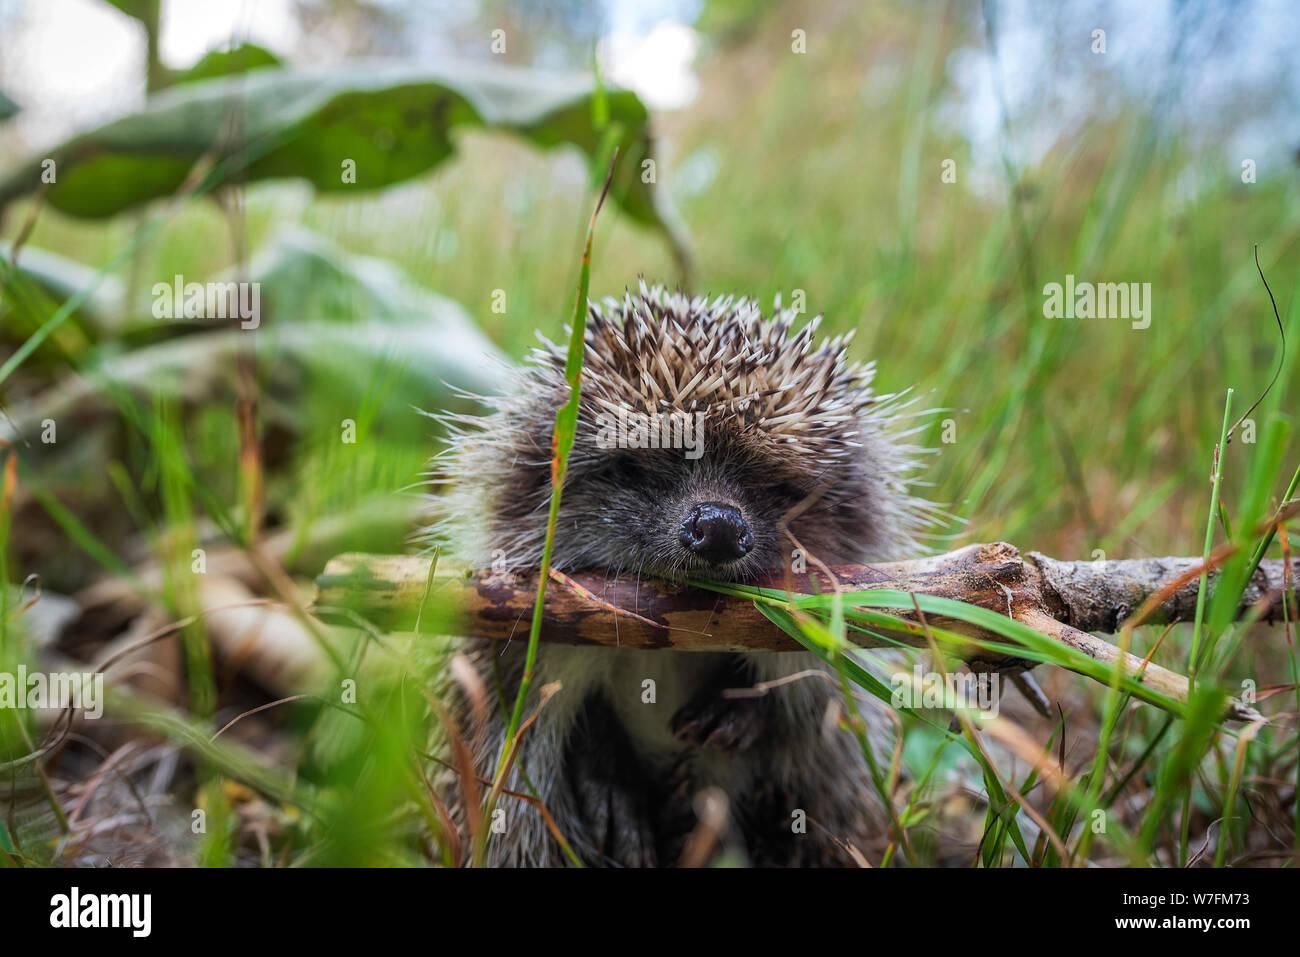 european-hedgehog-erinaceus-europaeus-on-a-green-moss-in-the-forest-summer-image-cute-funny-animal-with-snipes-W7FM73.jpg